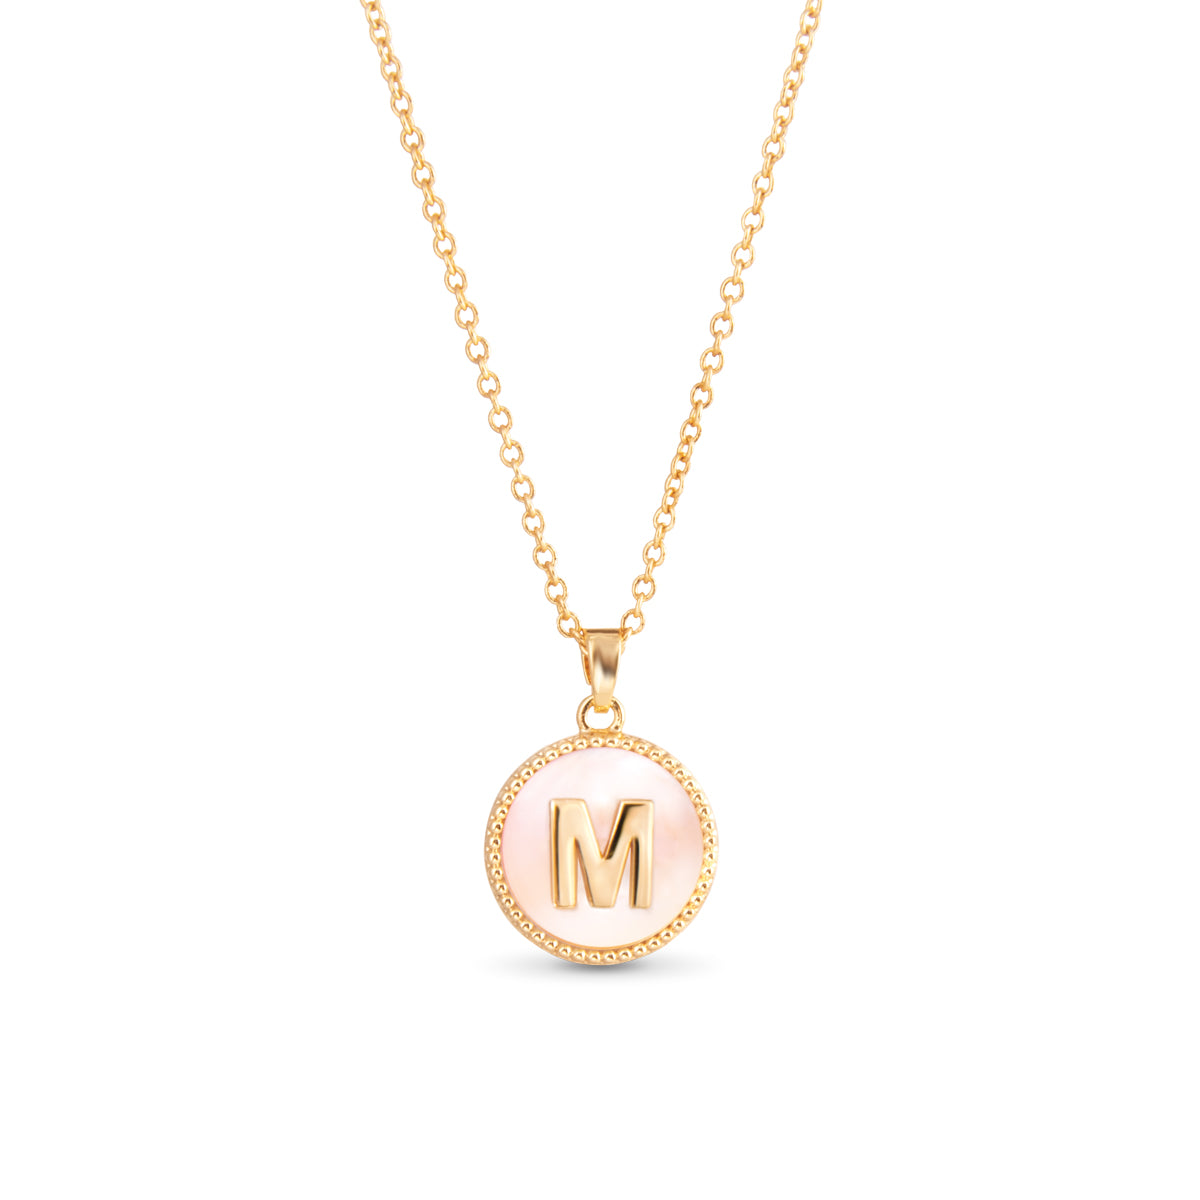 Gold Mother of Pearl Initial Necklace - M